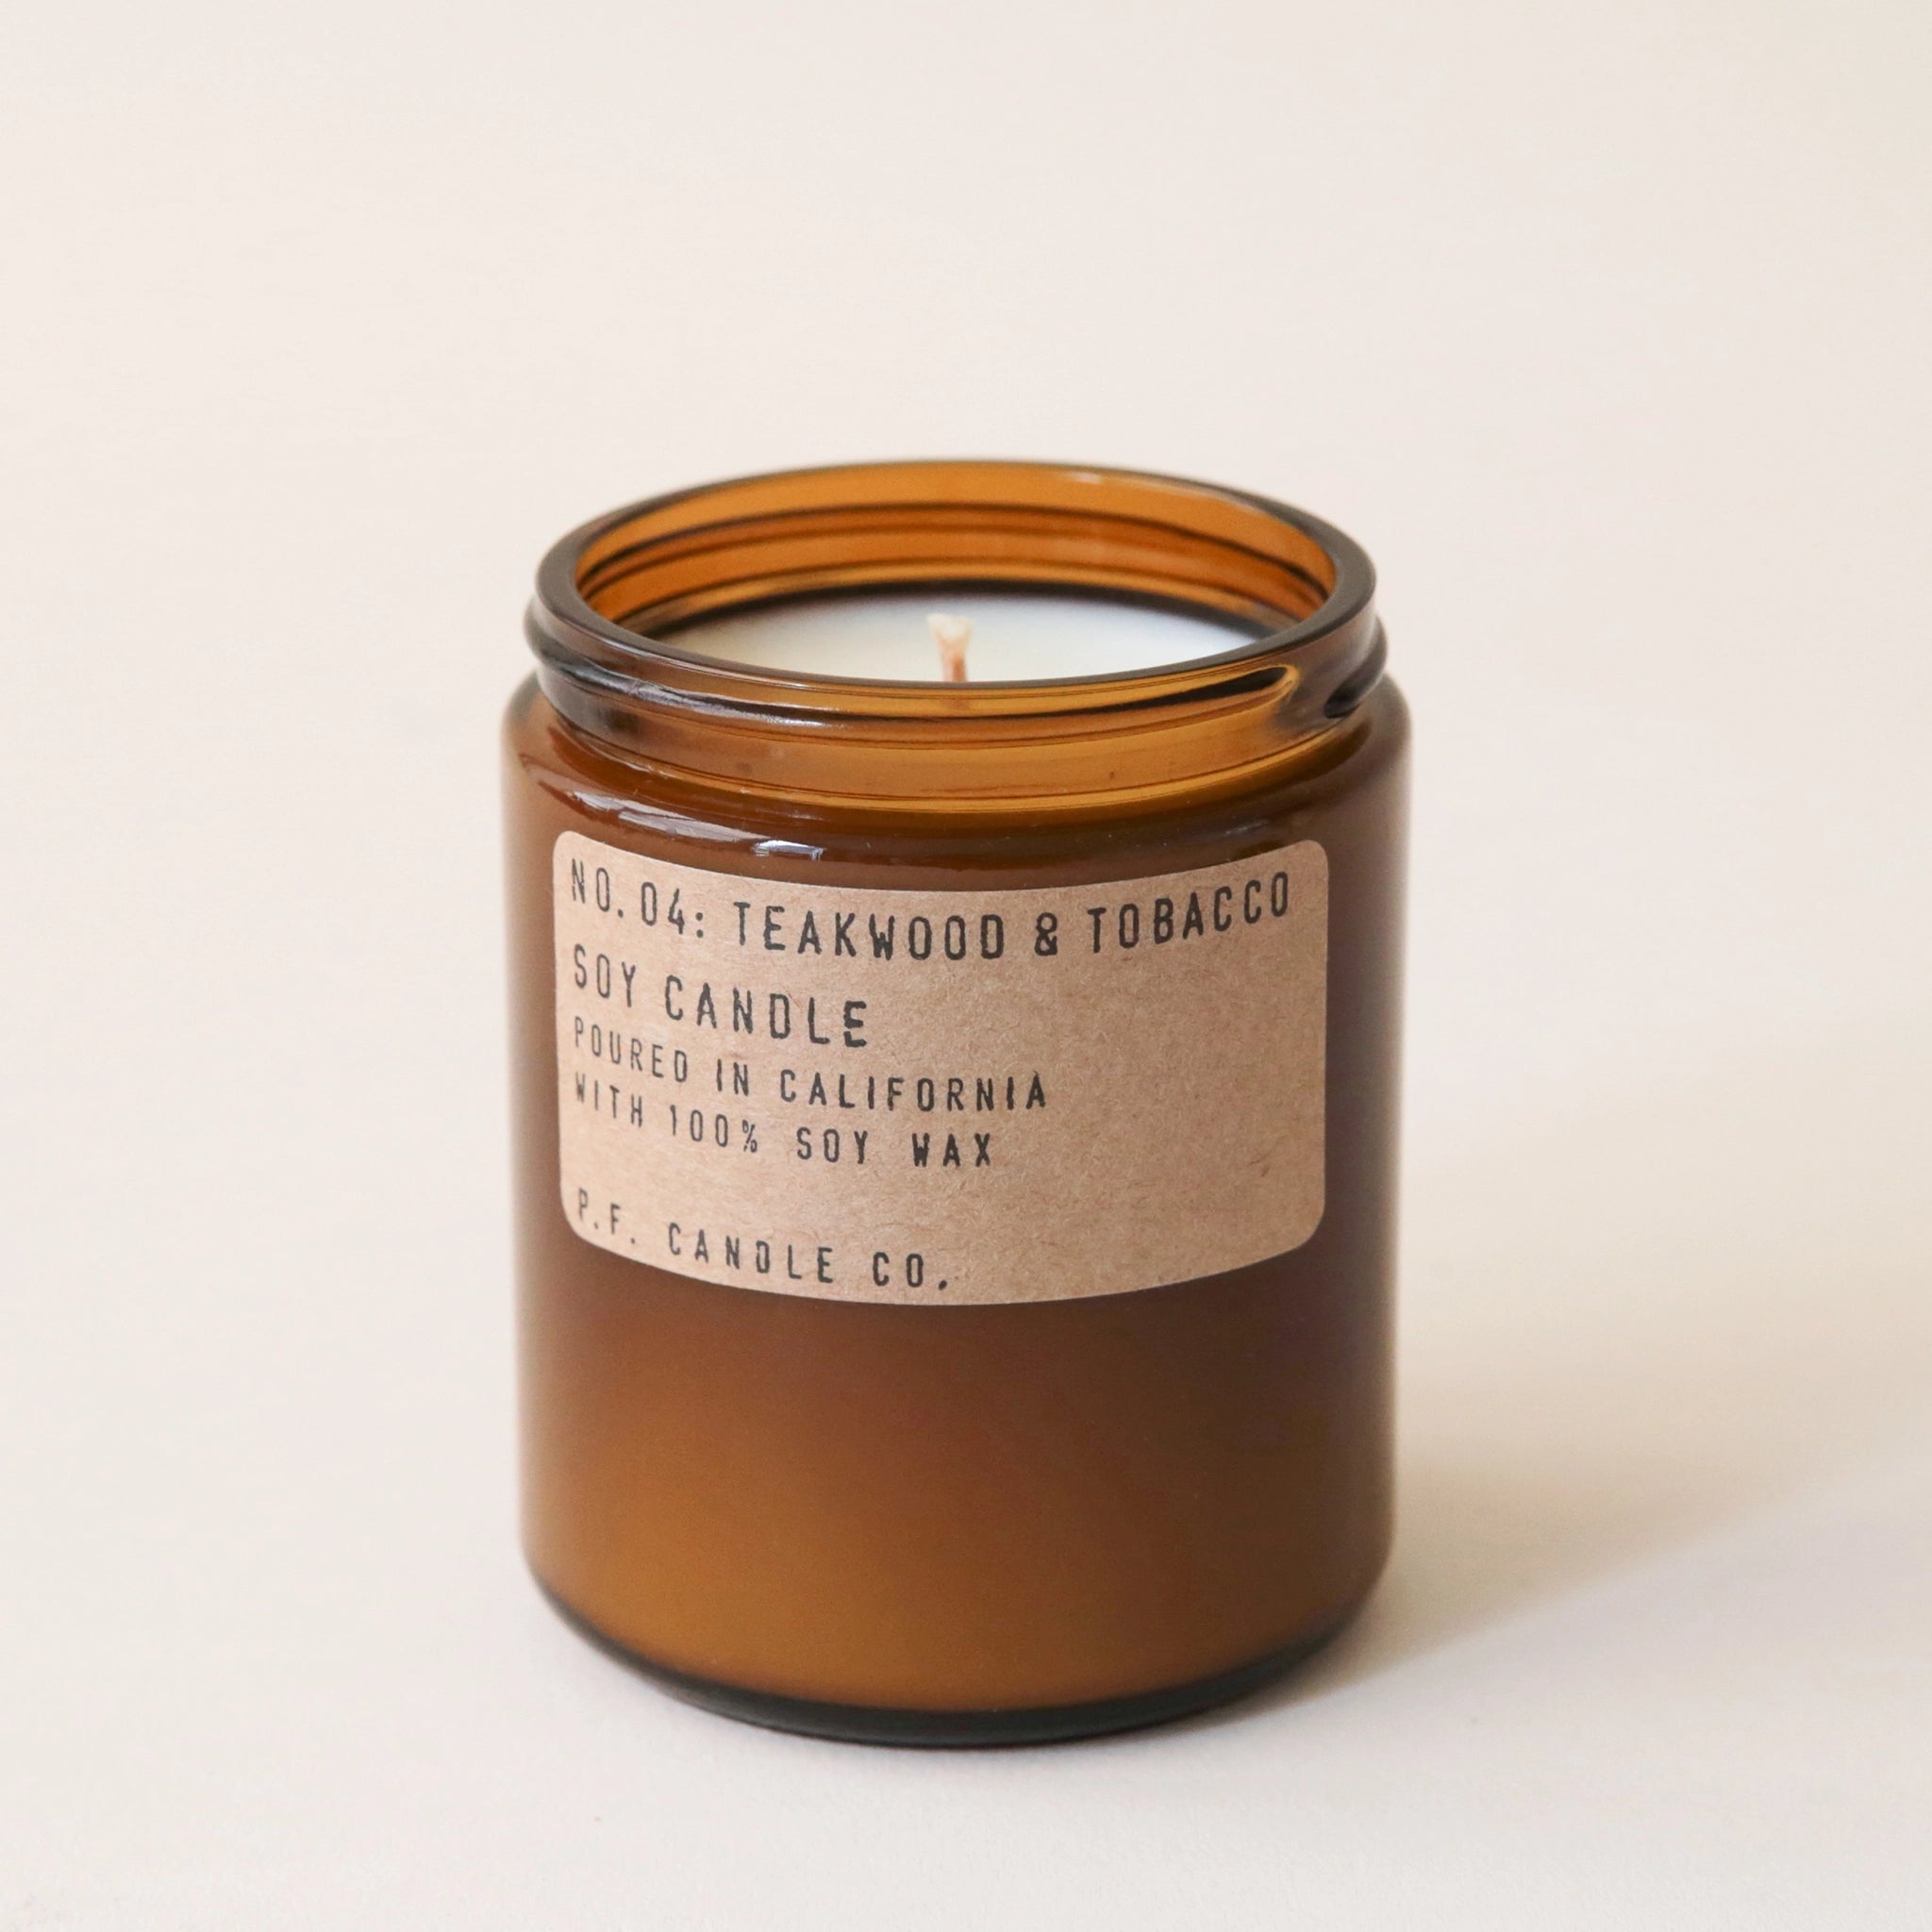 Against a white background is a dark amber, round jar. On the front of the jar is a brown, rounded, rectangular sticker with black text. The text reads ‘no.04 teakwood & tobacco. Soy candle. Handmade in California with 100% soy way. P.F. candle co.’